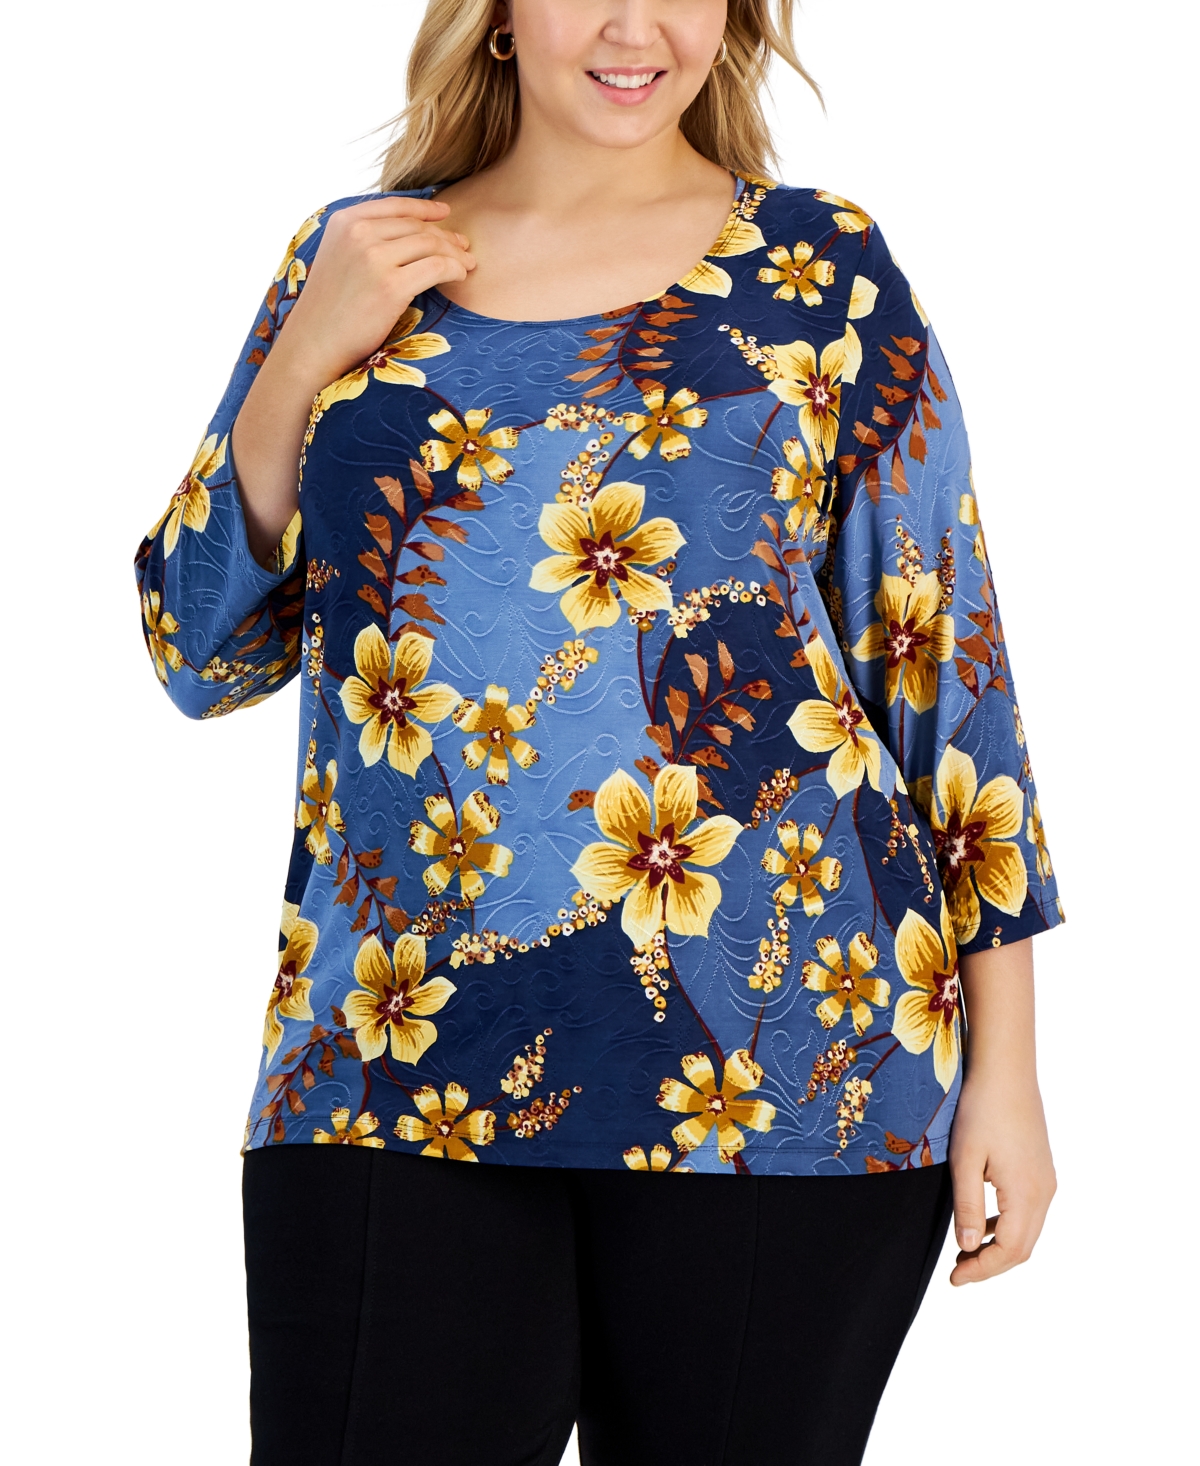 JM Collection Floral-Print Cold-Shoulder Top, Created for Macy's - Macy's